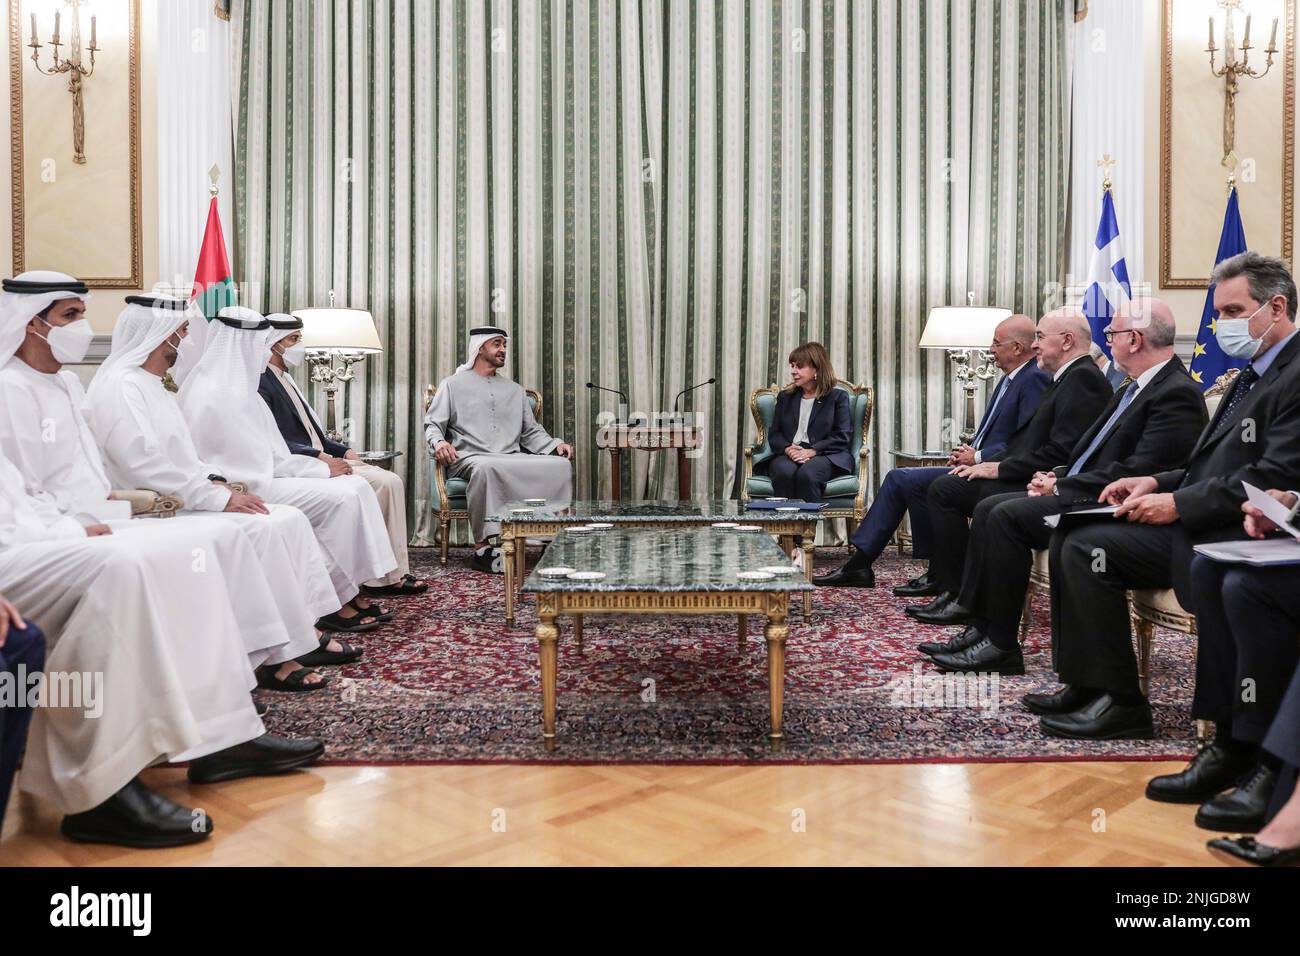 In this photo provided by the Greek President's office, Greece's President  Katerina Sakellaropoulou, right, joins a meeting with United Arab Emirates'  President Sheikh Mohammed Bin Zayed and other officials at the Presidential